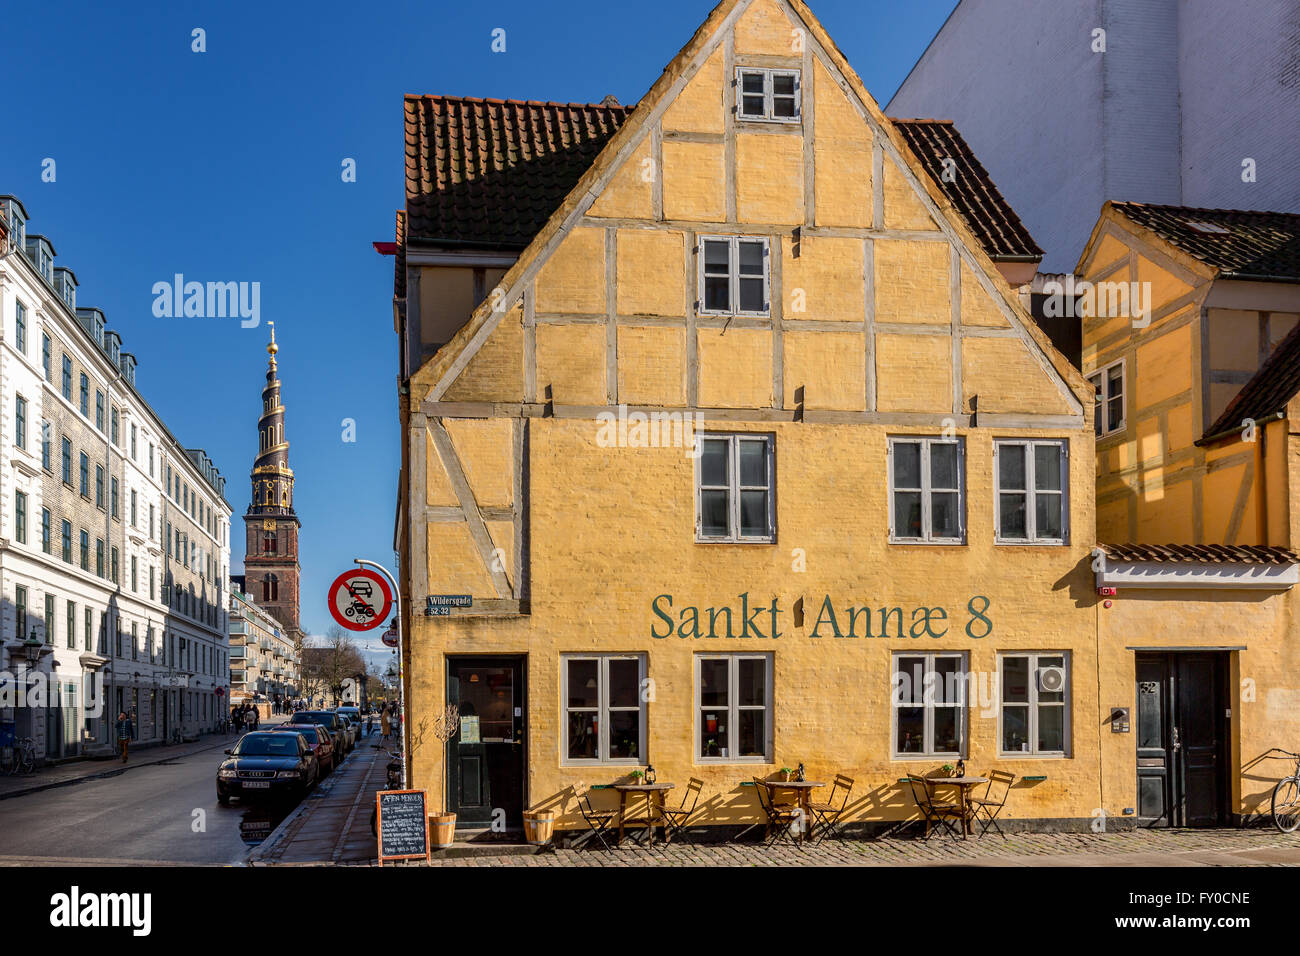 Annae High Resolution Stock and Images - Alamy